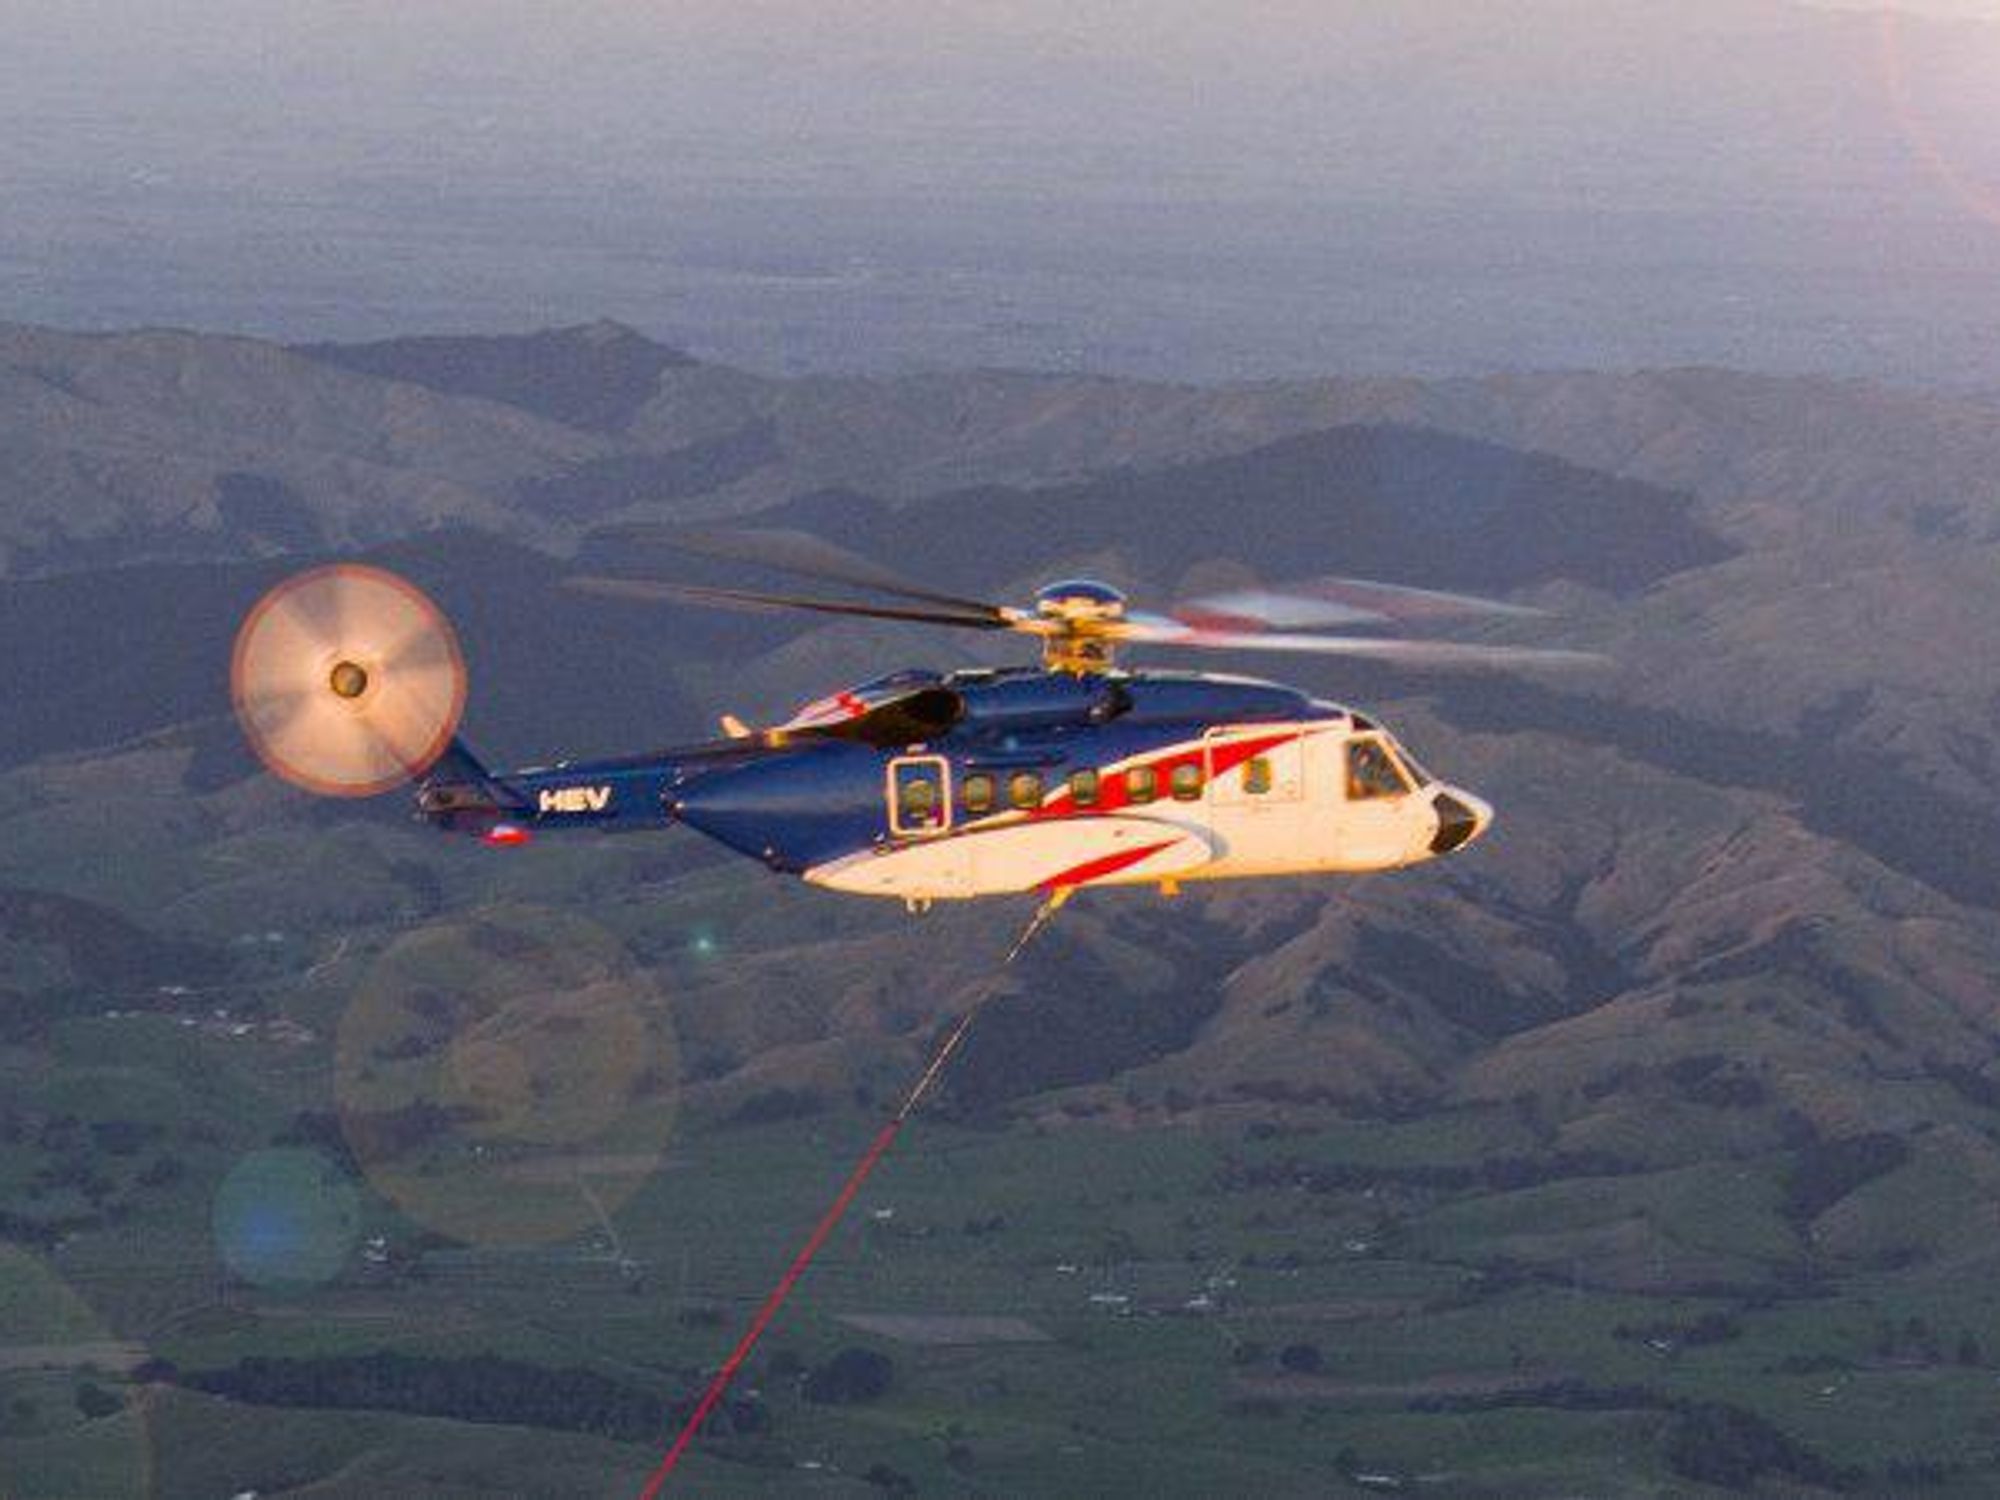 How To Watch Rocket Lab Use a Helicopter To Catch a Rocket Booster